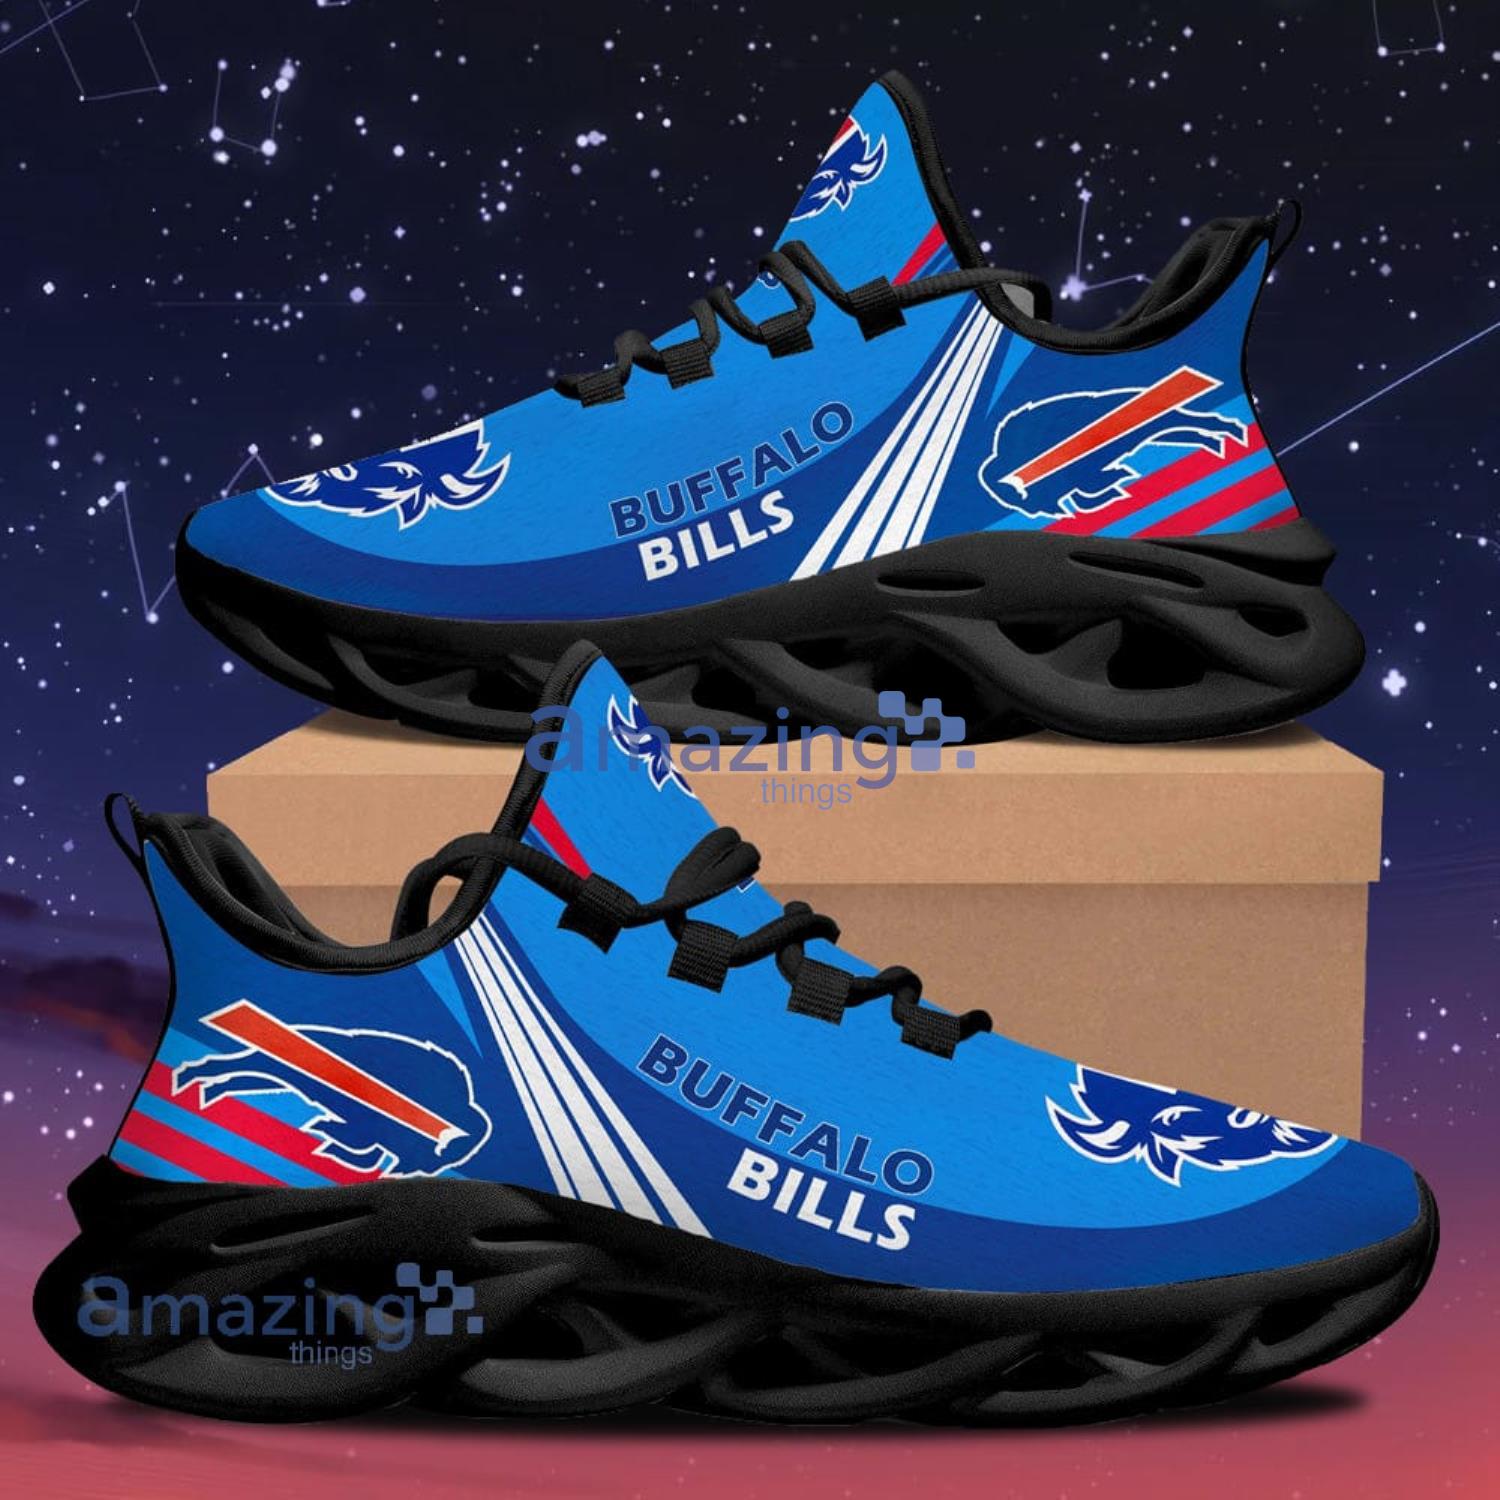 Buffalo Bills New Trend Max Soul Shoes Running Sneakers Product Photo 1